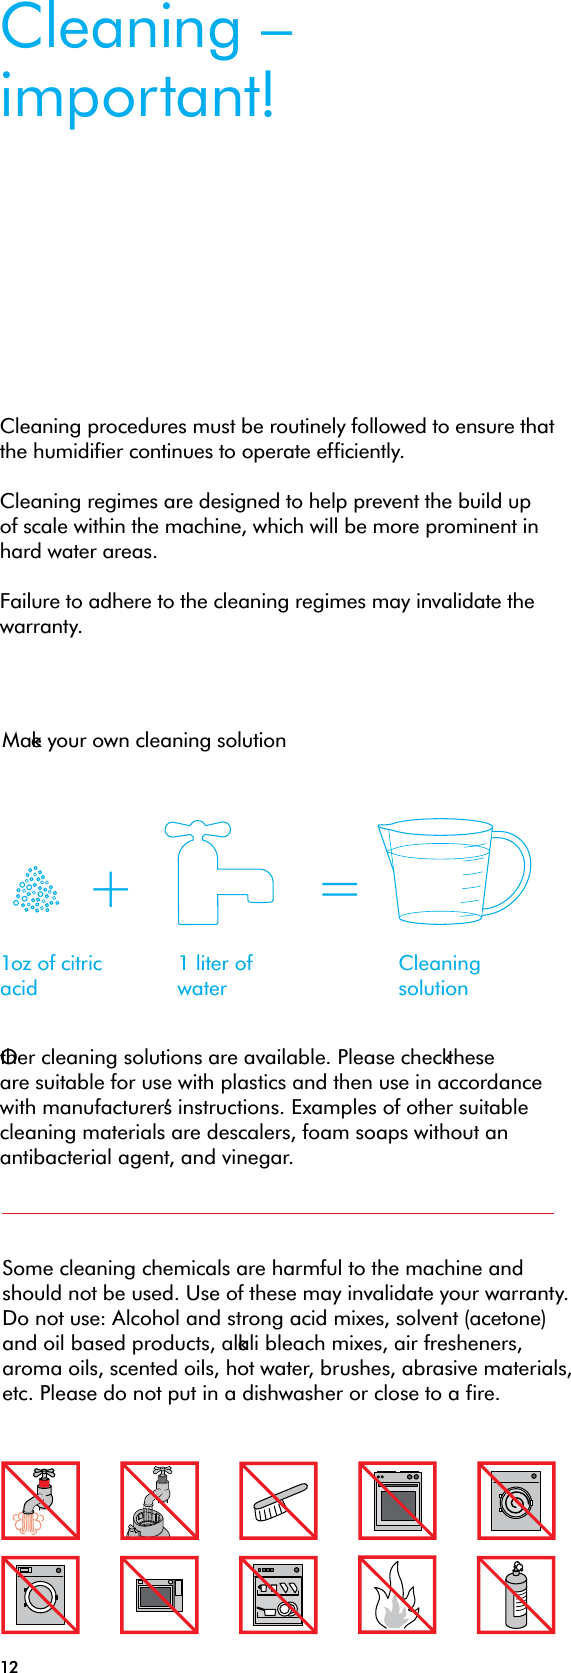 12Some cleaning chemicals are harmful to the machine and should not be used. Use of these may invalidate your warranty. Do not use: Alcohol and strong acid mixes, solvent (acetone) and oil based products, alkali bleach mixes, air fresheners, aroma oils, scented oils, hot water, brushes, abrasive materials, etc. Please do not put in a dishwasher or close to a fire.Cleaning – important!Cleaning procedures must be routinely followed to ensure that the humidifier continues to operate efficiently. Cleaning regimes are designed to help prevent the build up of scale within the machine, which will be more prominent in hard water areas. Failure to adhere to the cleaning regimes may invalidate the warranty.Other cleaning solutions are available. Please check these are suitable for use with plastics and then use in accordance with manufacturer’s instructions. Examples of other suitable cleaning materials are descalers, foam soaps without an antibacterial agent, and vinegar.1oz of citric acid1 liter of waterCleaning solution+ =Make your own cleaning solution